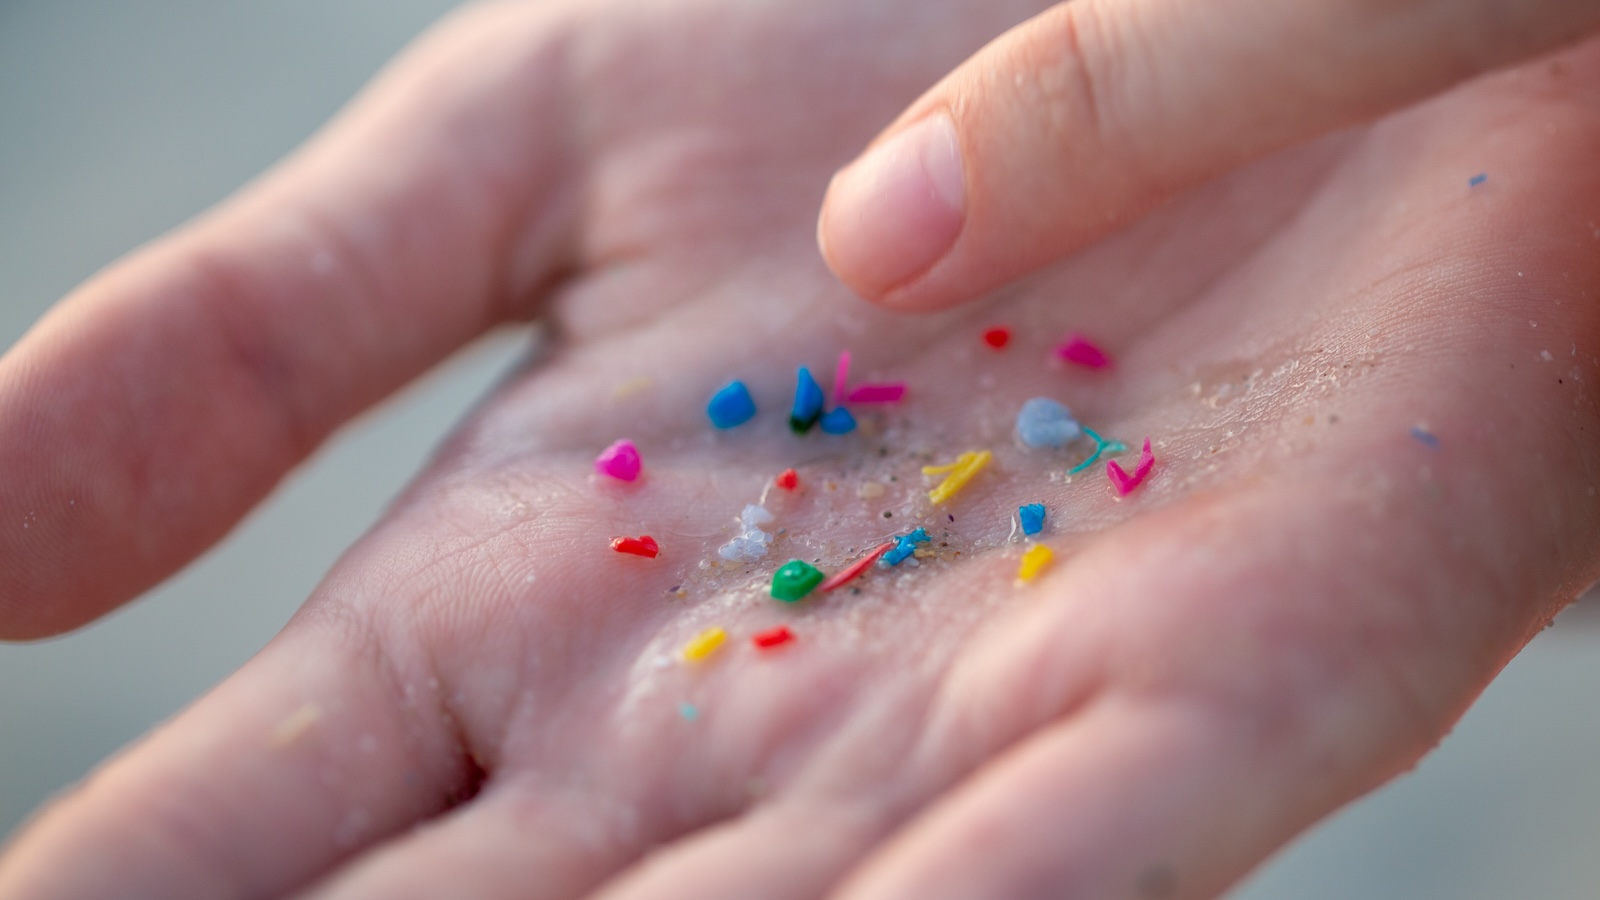 Close-up of a hand with multicolored pieces of microplastics in it, with a finger pointing to them.